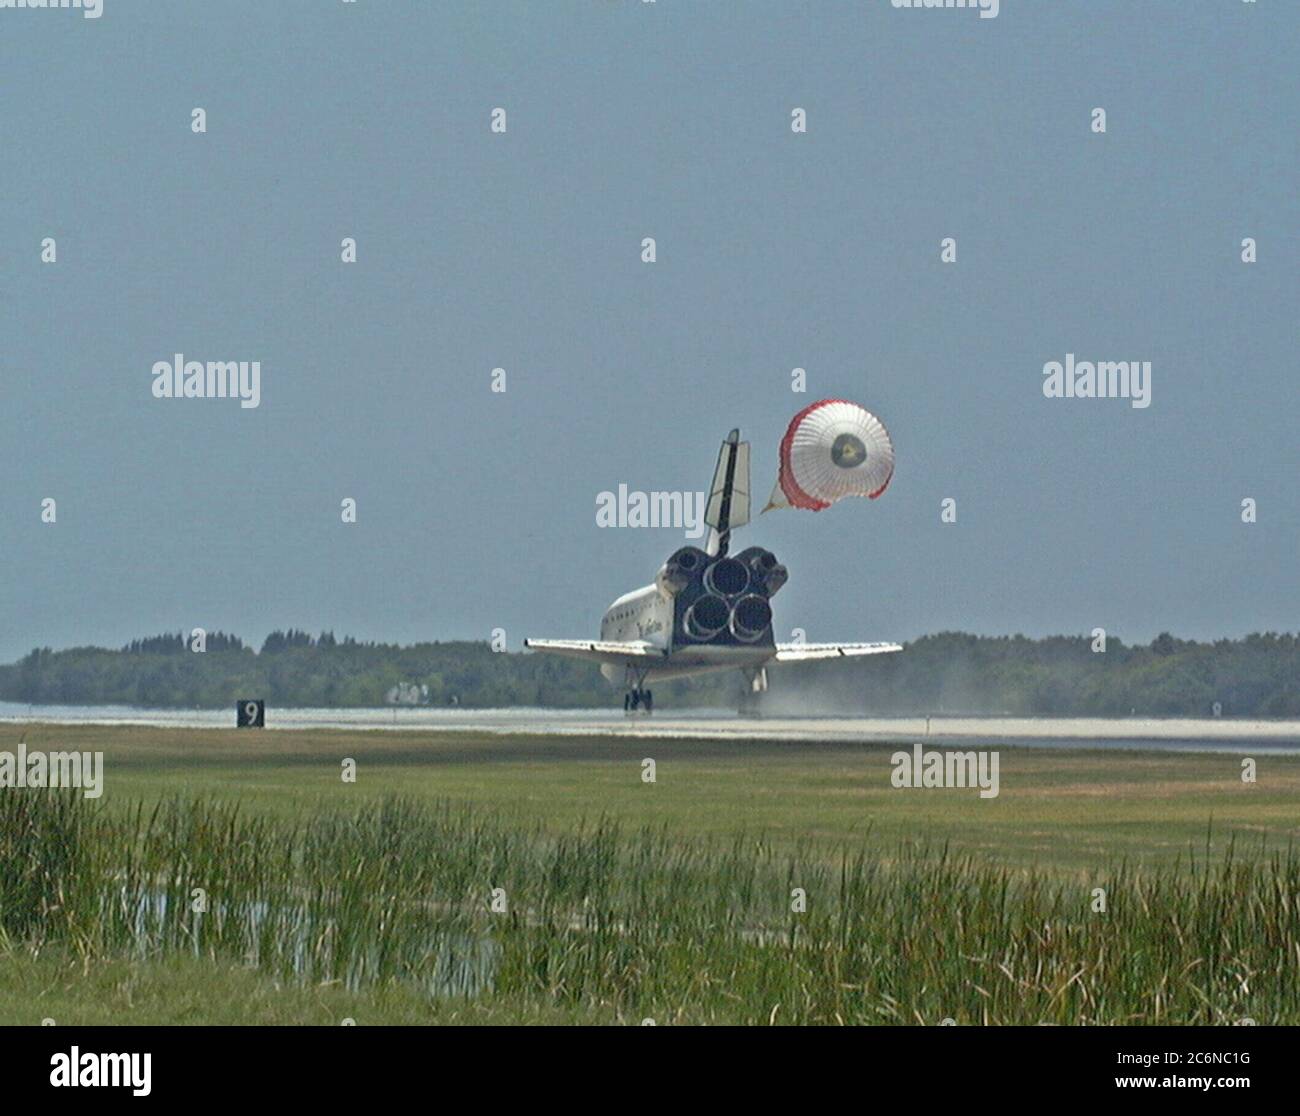 KENNEDY SPACE CENTER, FLA. -- With its drag chute deployed, the orbiter Discovery touches down on Runway 15 of KSC's Shuttle Landing Facility to complete the STS-91 mission. Main gear touchdown was at 2:00:18 p.m. EDT on June 12, 1998, landing on orbit 155 of the mission. The wheels stopped at 2:01:22 p.m. EDT, for a total mission-elapsed time of 9 days, 19 hours, 55 minutes and 1 second. Stock Photo